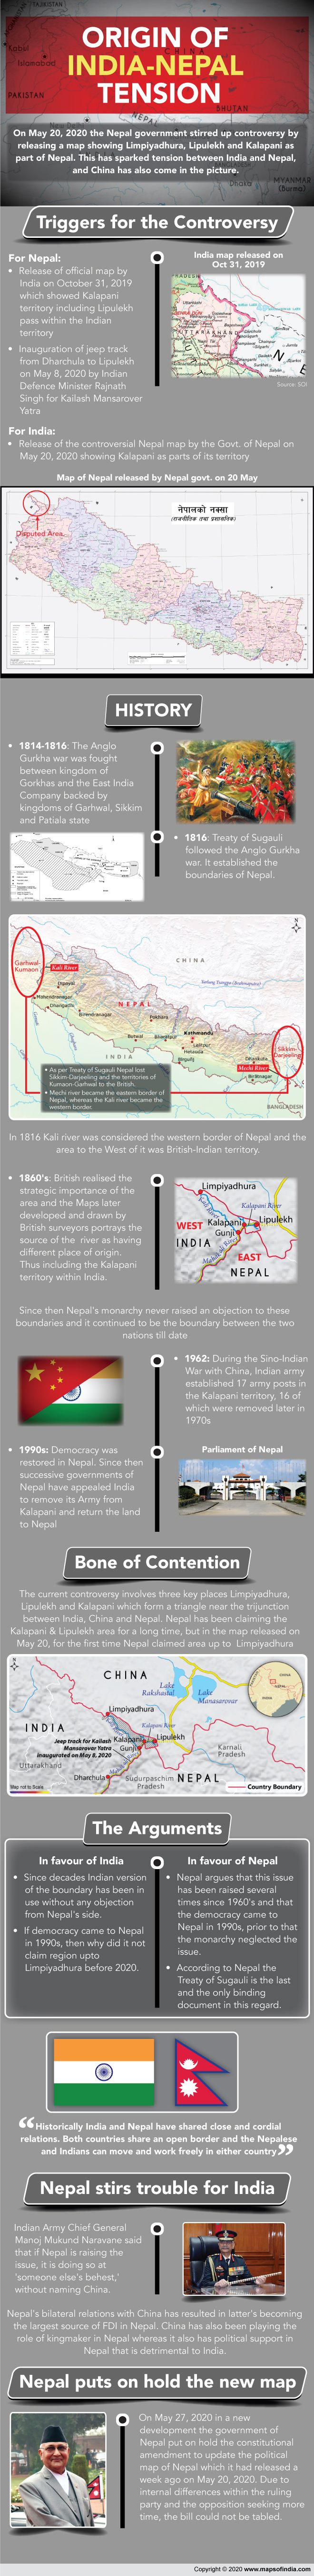 Info-graphic showing origin of India-Nepal Tension